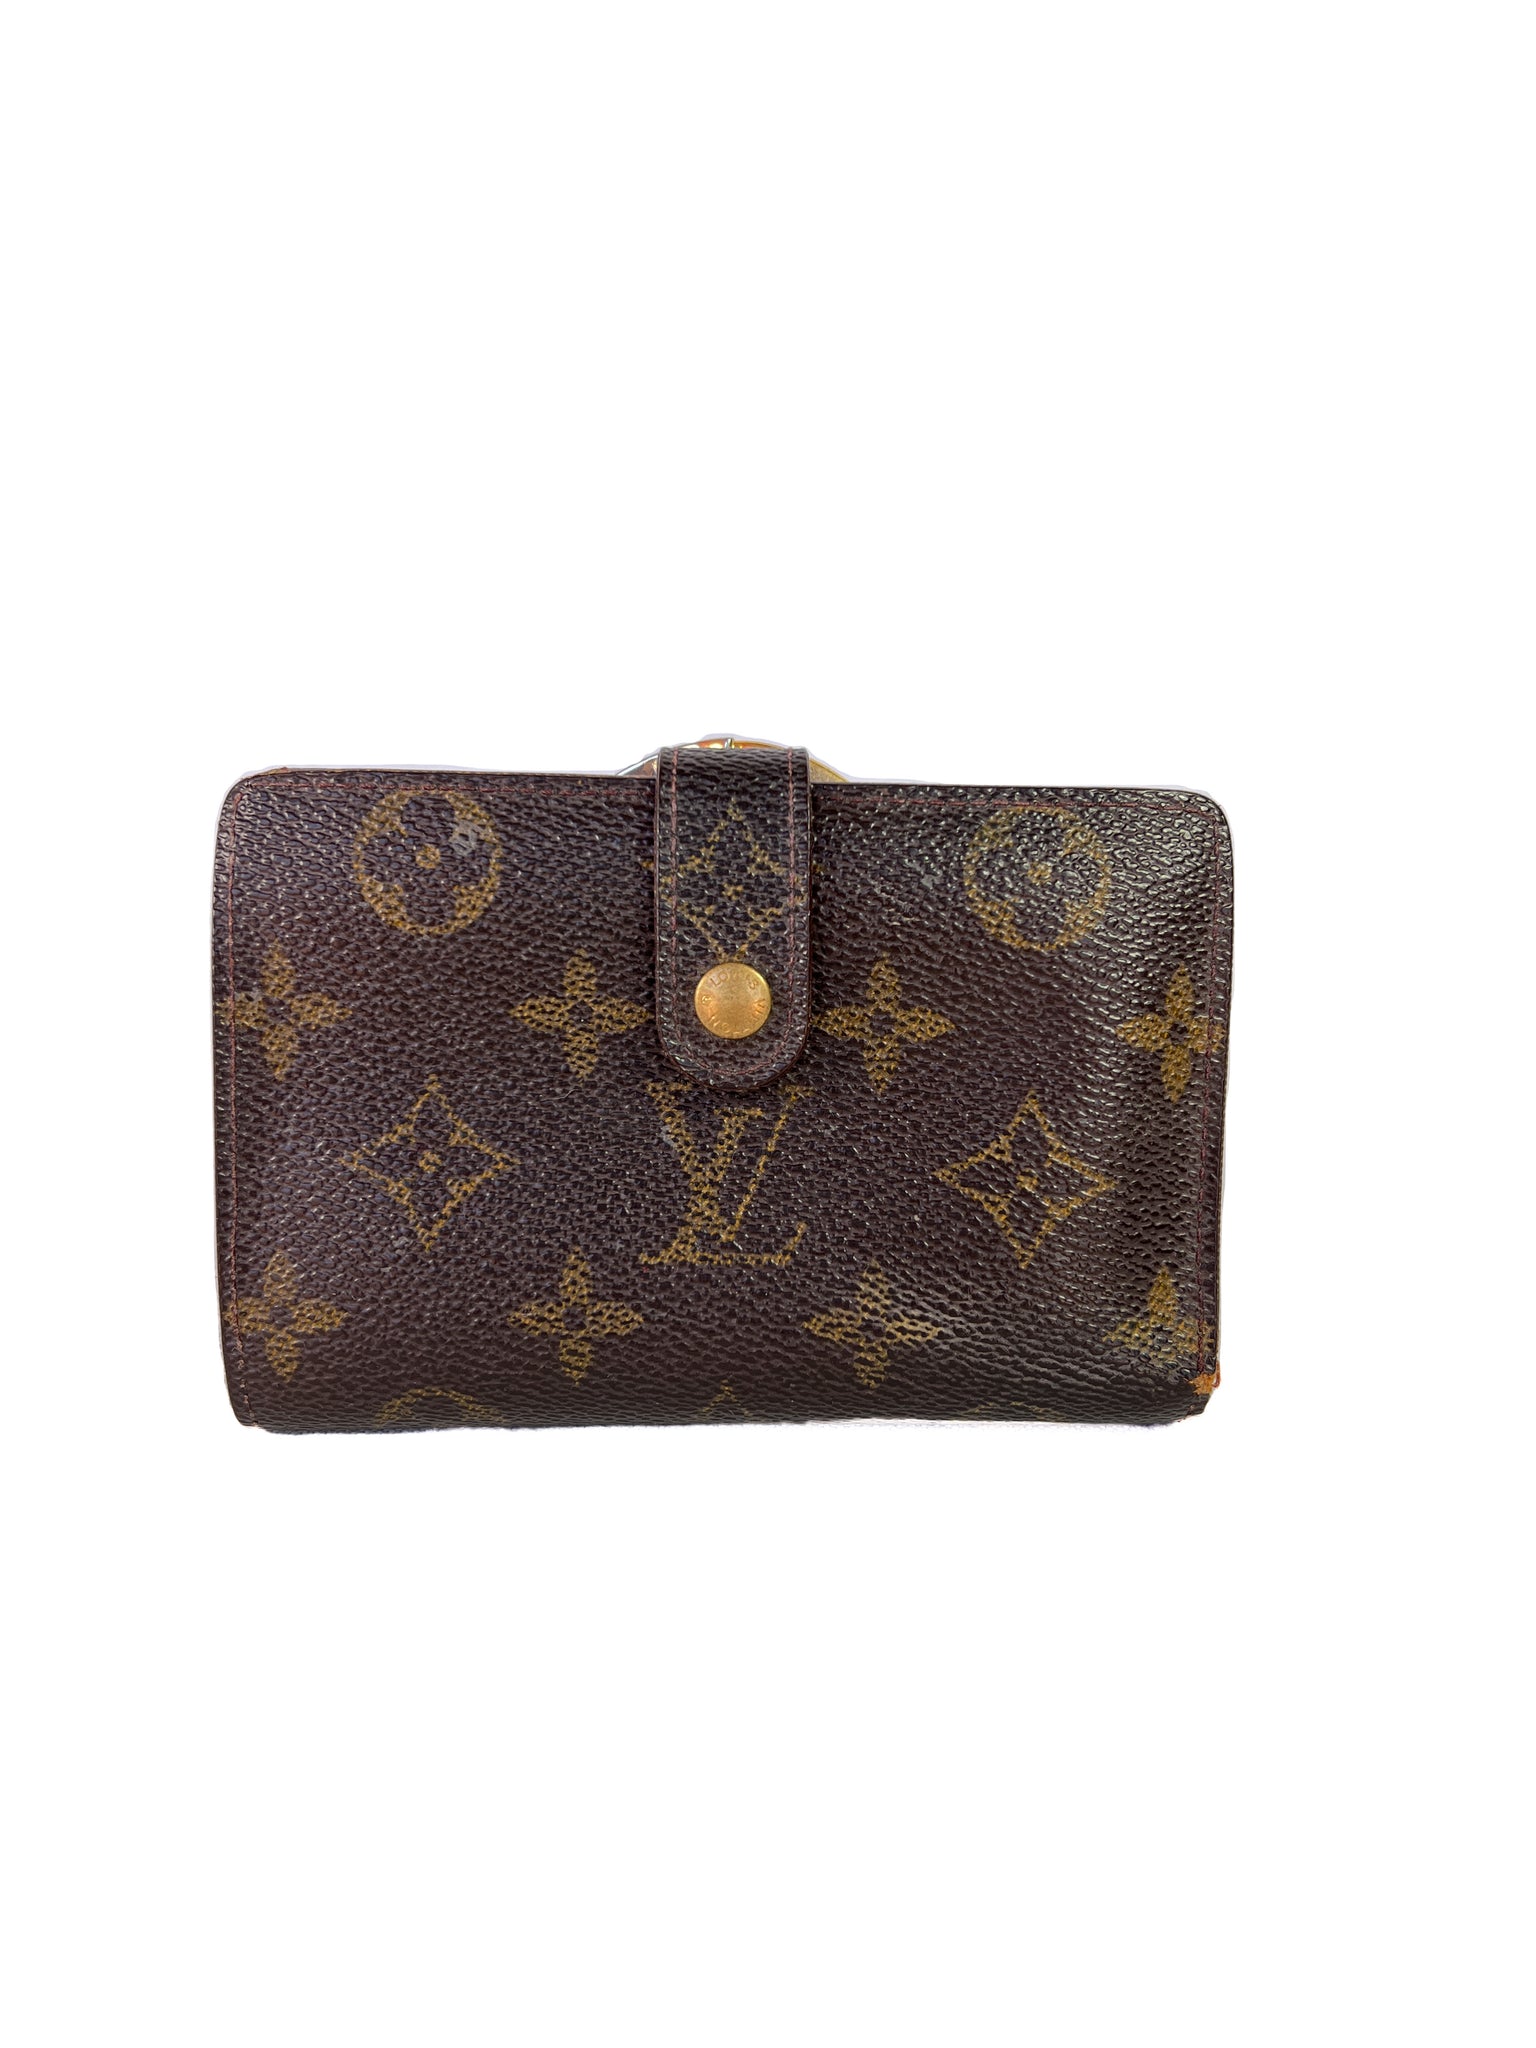 louis vuitton french site